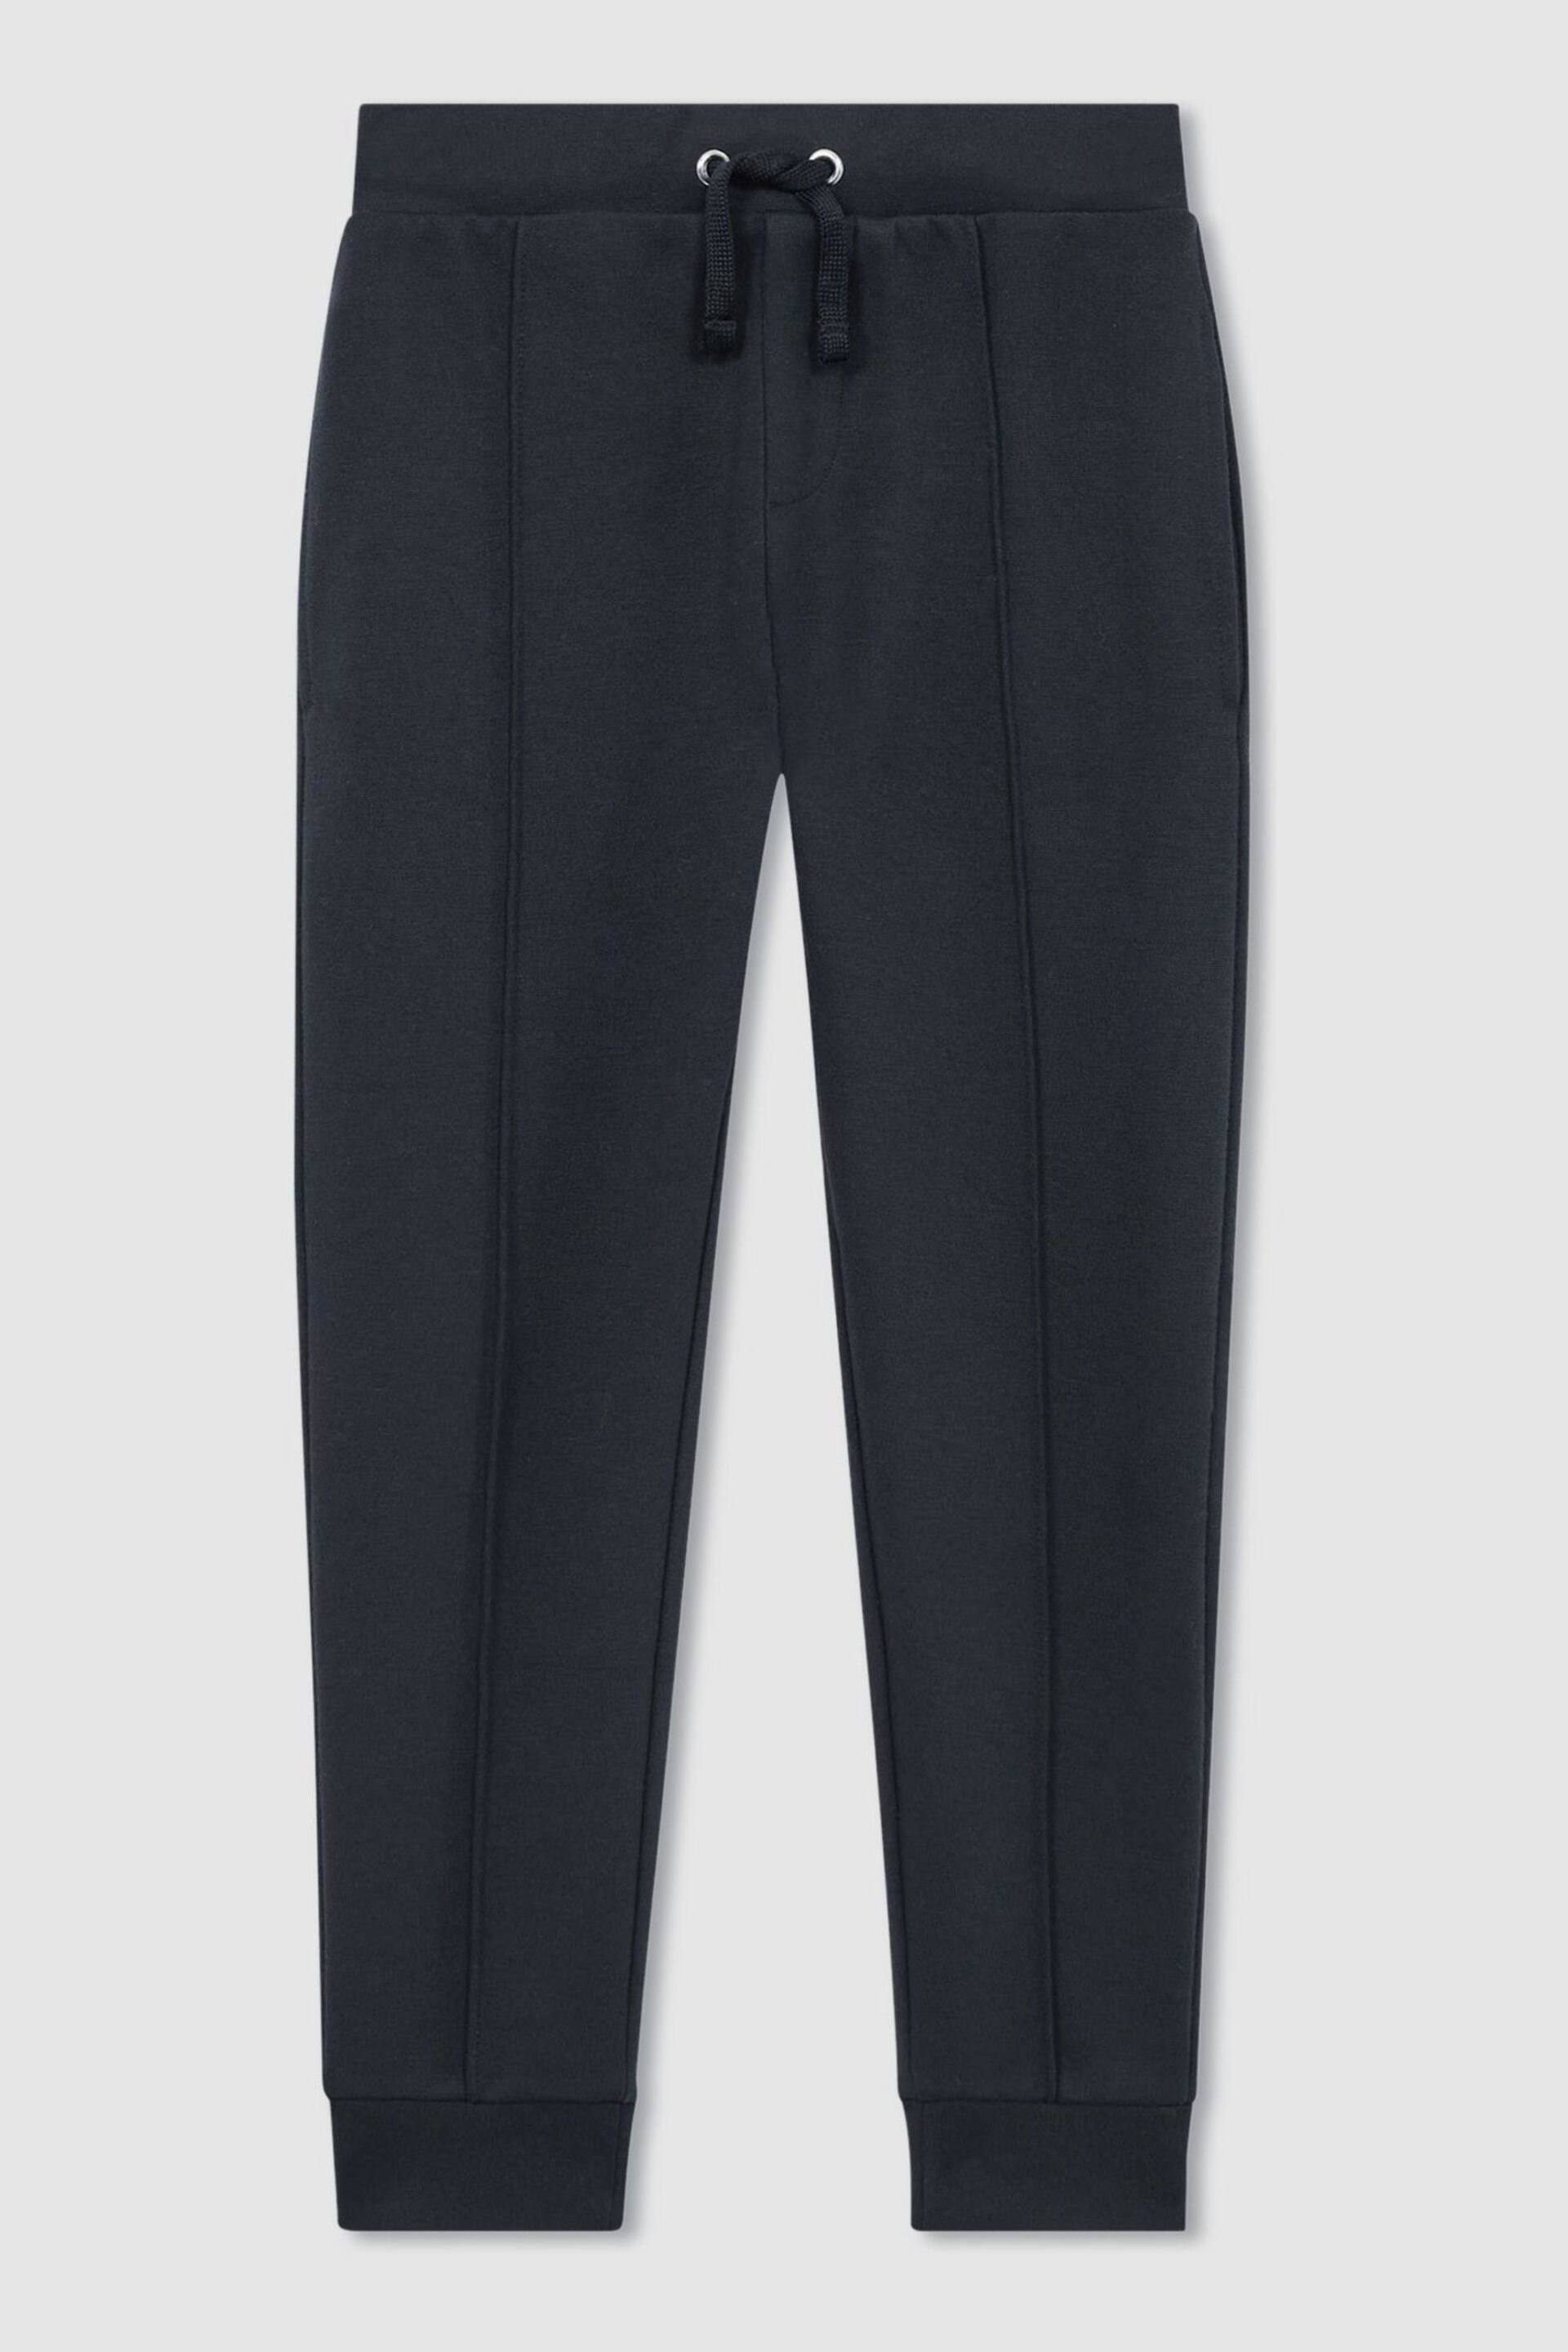 Reiss Navy Croxley Junior Relaxed Drawstring Joggers - Image 2 of 6